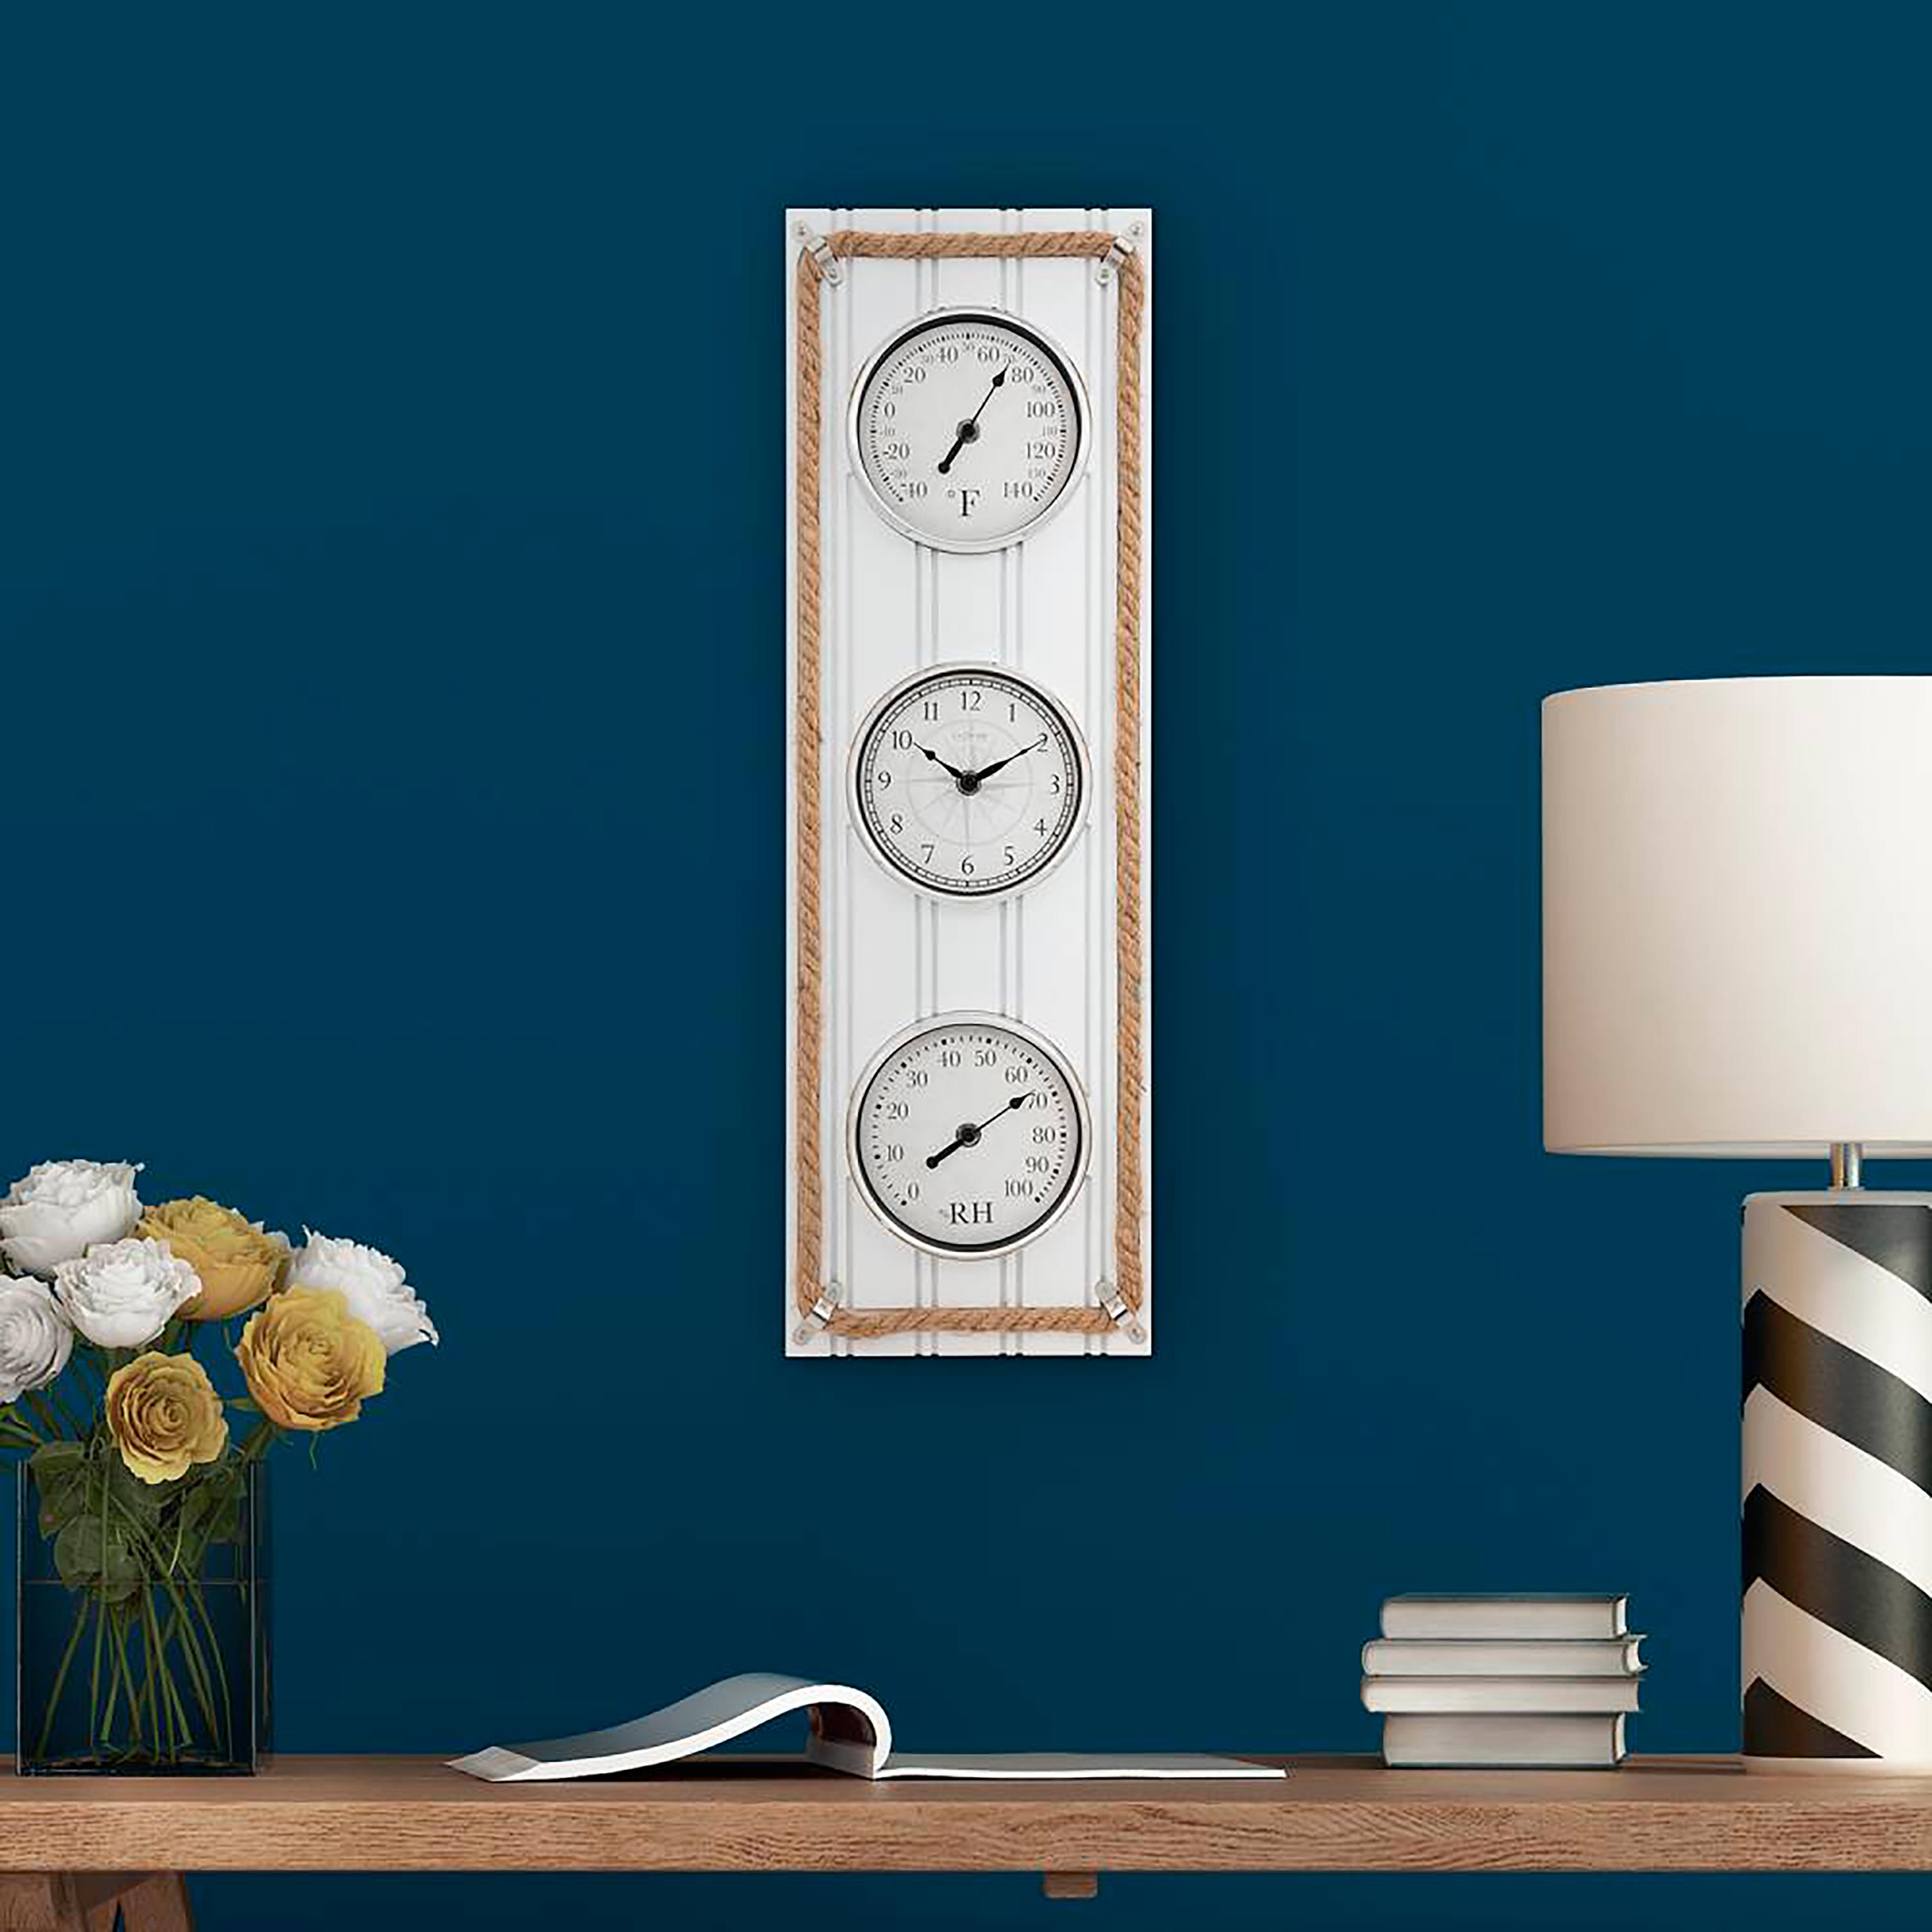 14 Decorative Thermometer with Clock